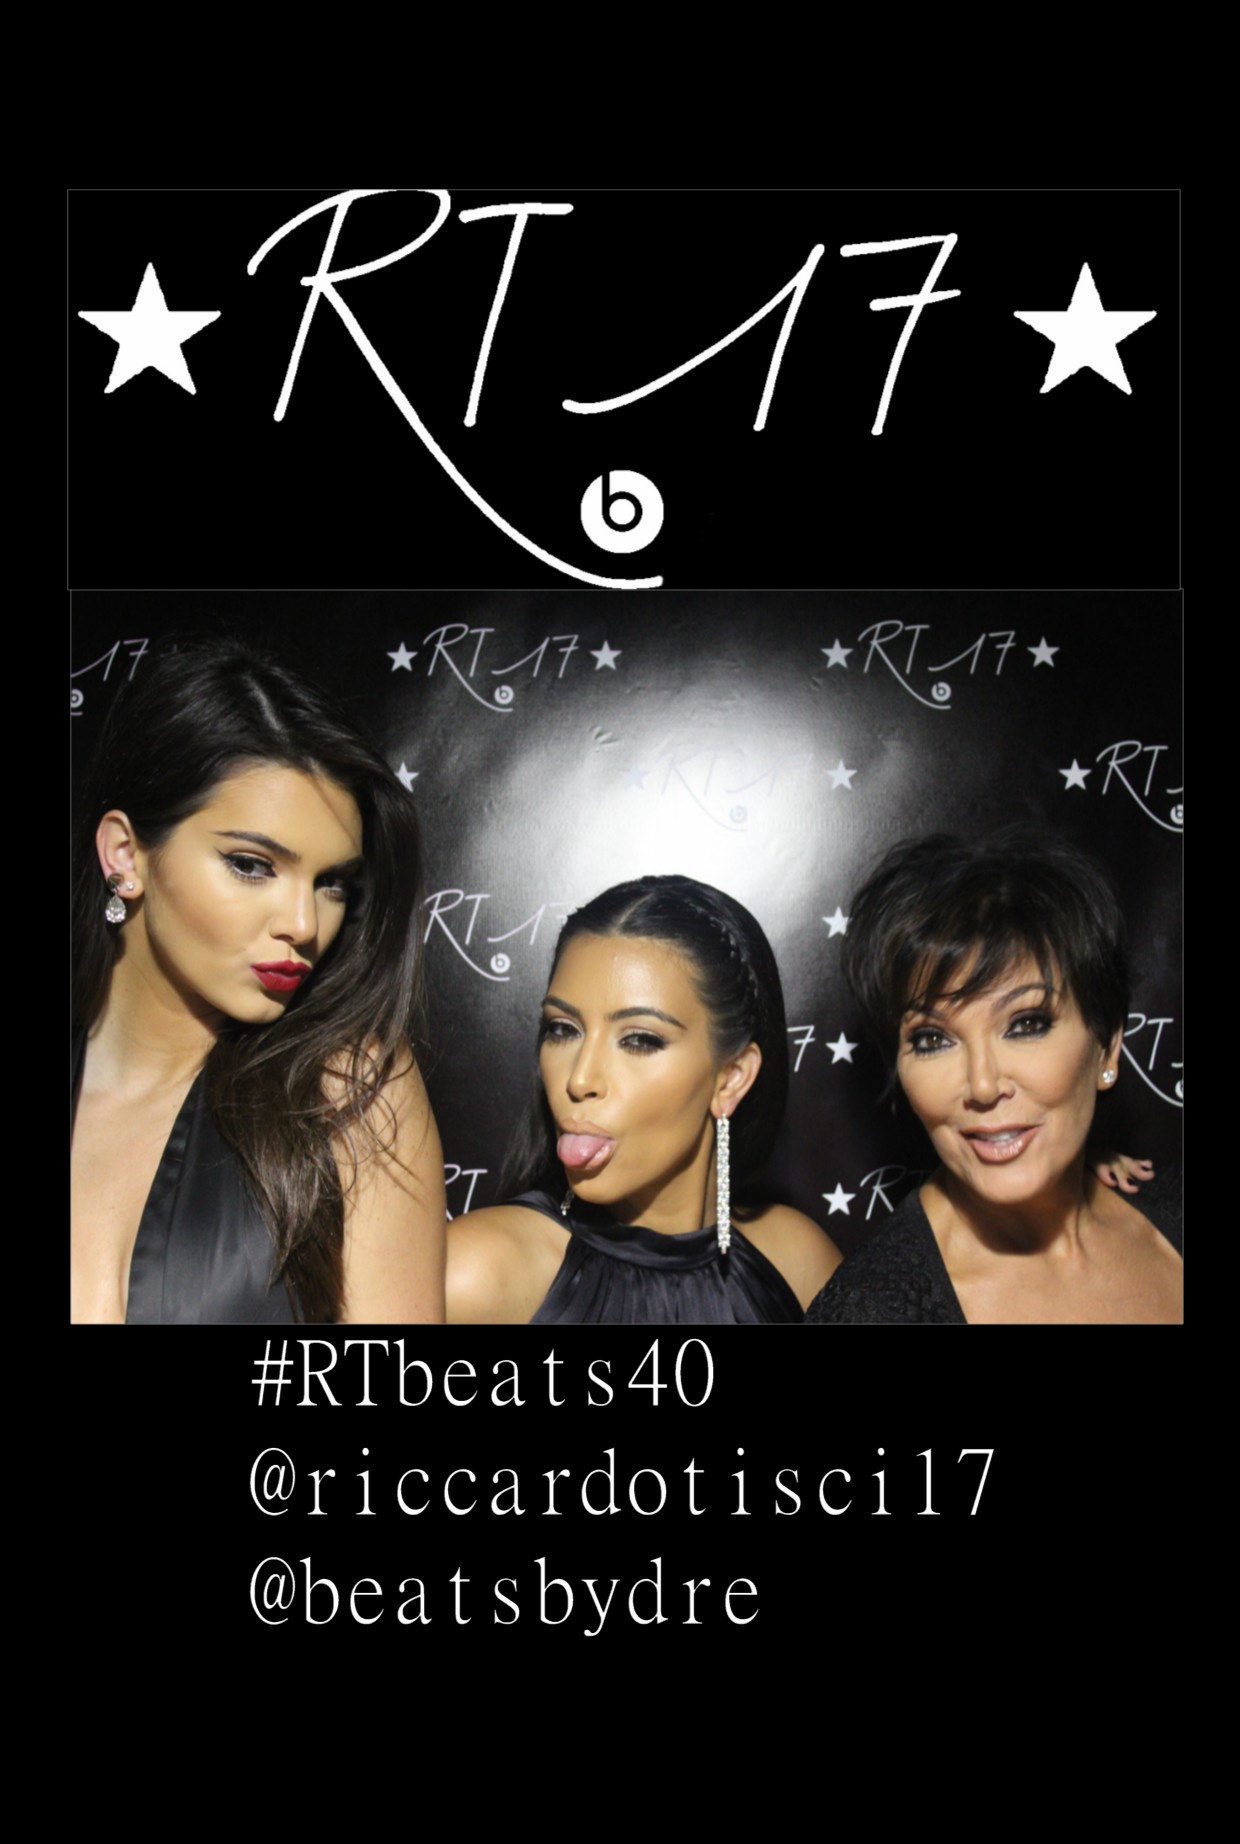 Kendall Jenner, Kim Kardashian, Kris Jenner joined Beats by Dre to wish Riccardo Tisci Happy 40th in the Beats by Dre photobooth